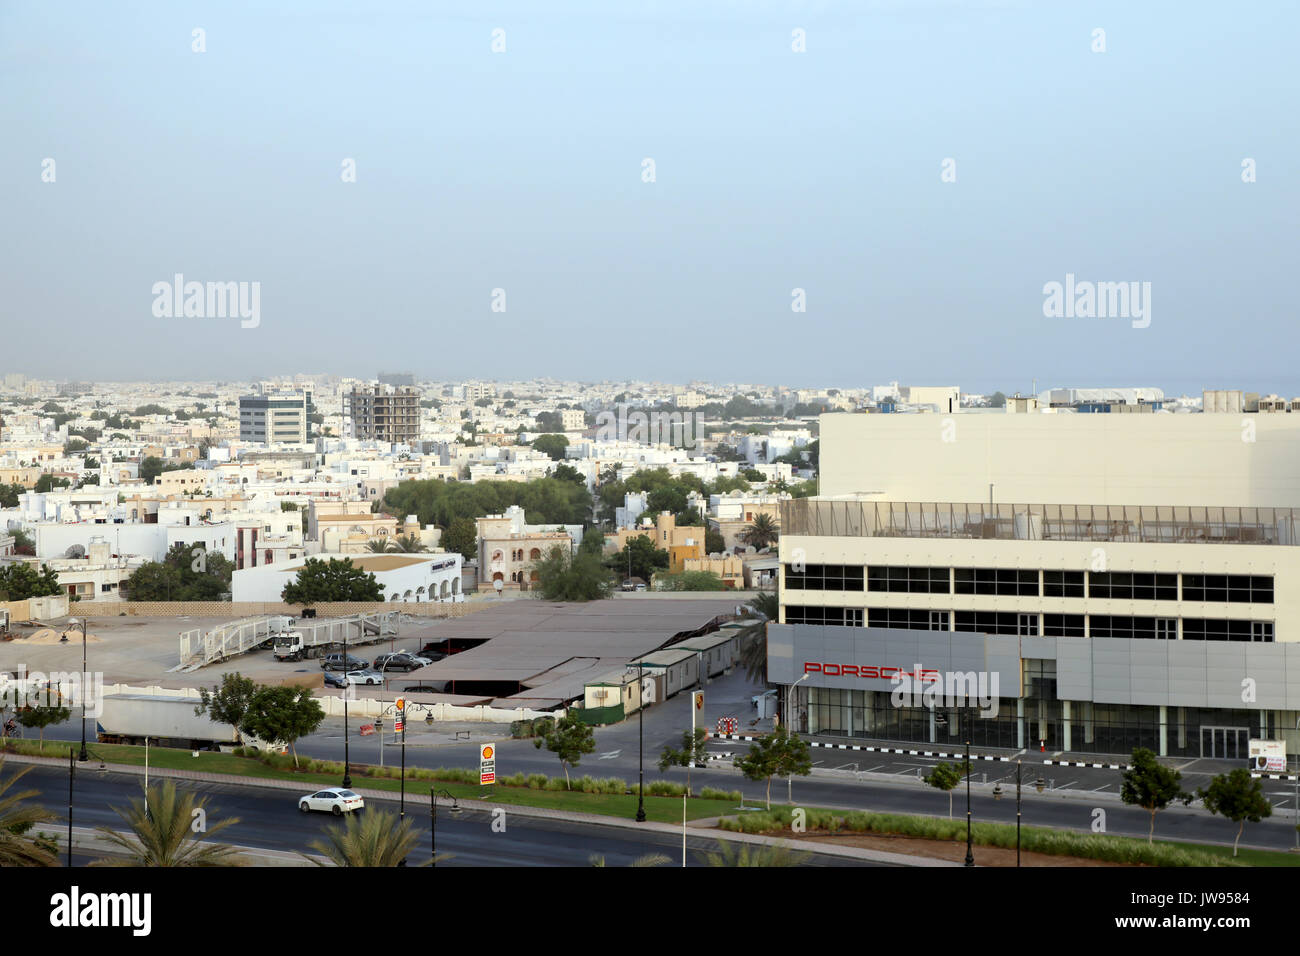 A Porsche showroom in the Al Badi area of the Omani capital, Muscat on 8 August 2017 Stock Photo